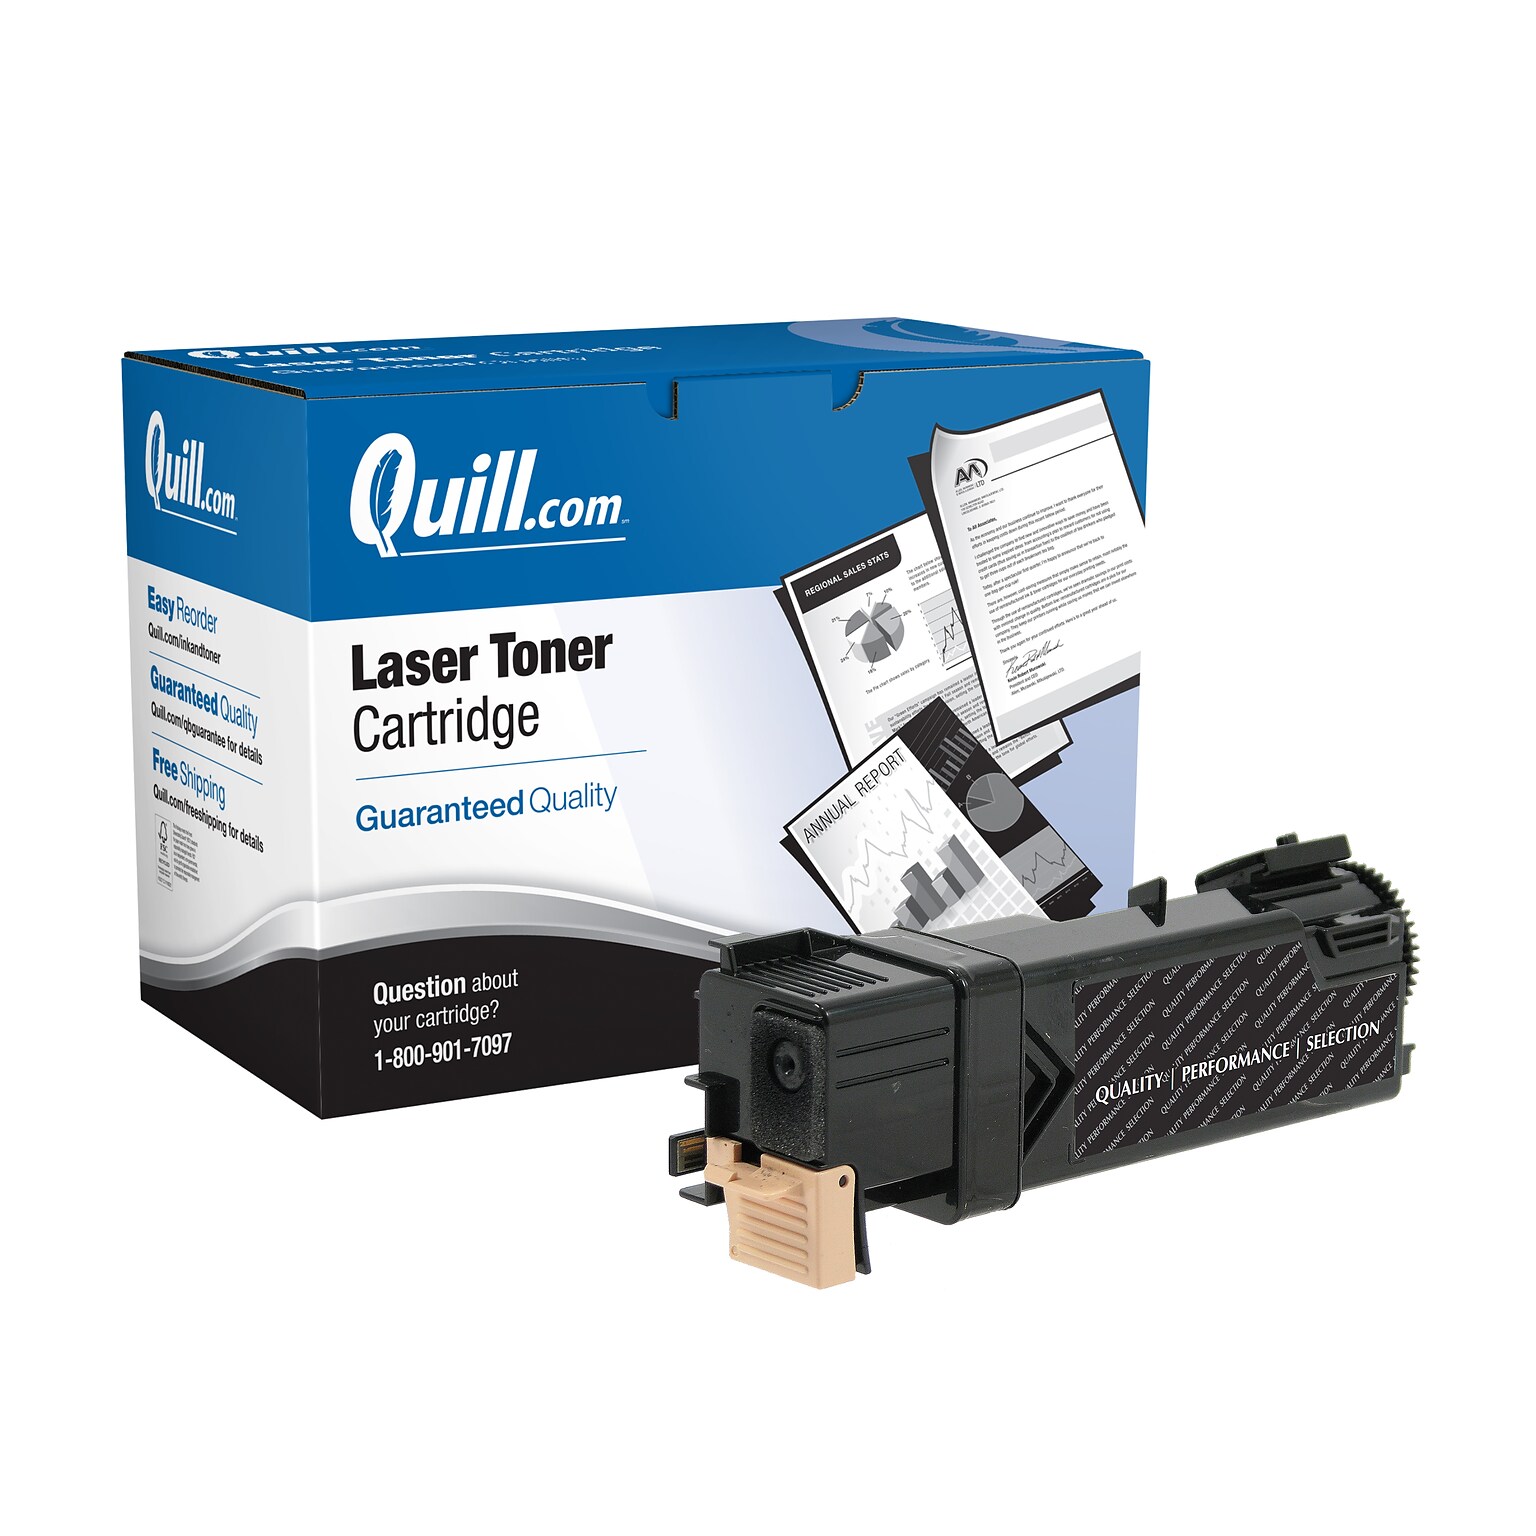 Quill Brand® Remanufactured Black High Yield Toner Cartridge Replacement for Xerox 6500/6505 (106R01597) (Lifetime Warranty)